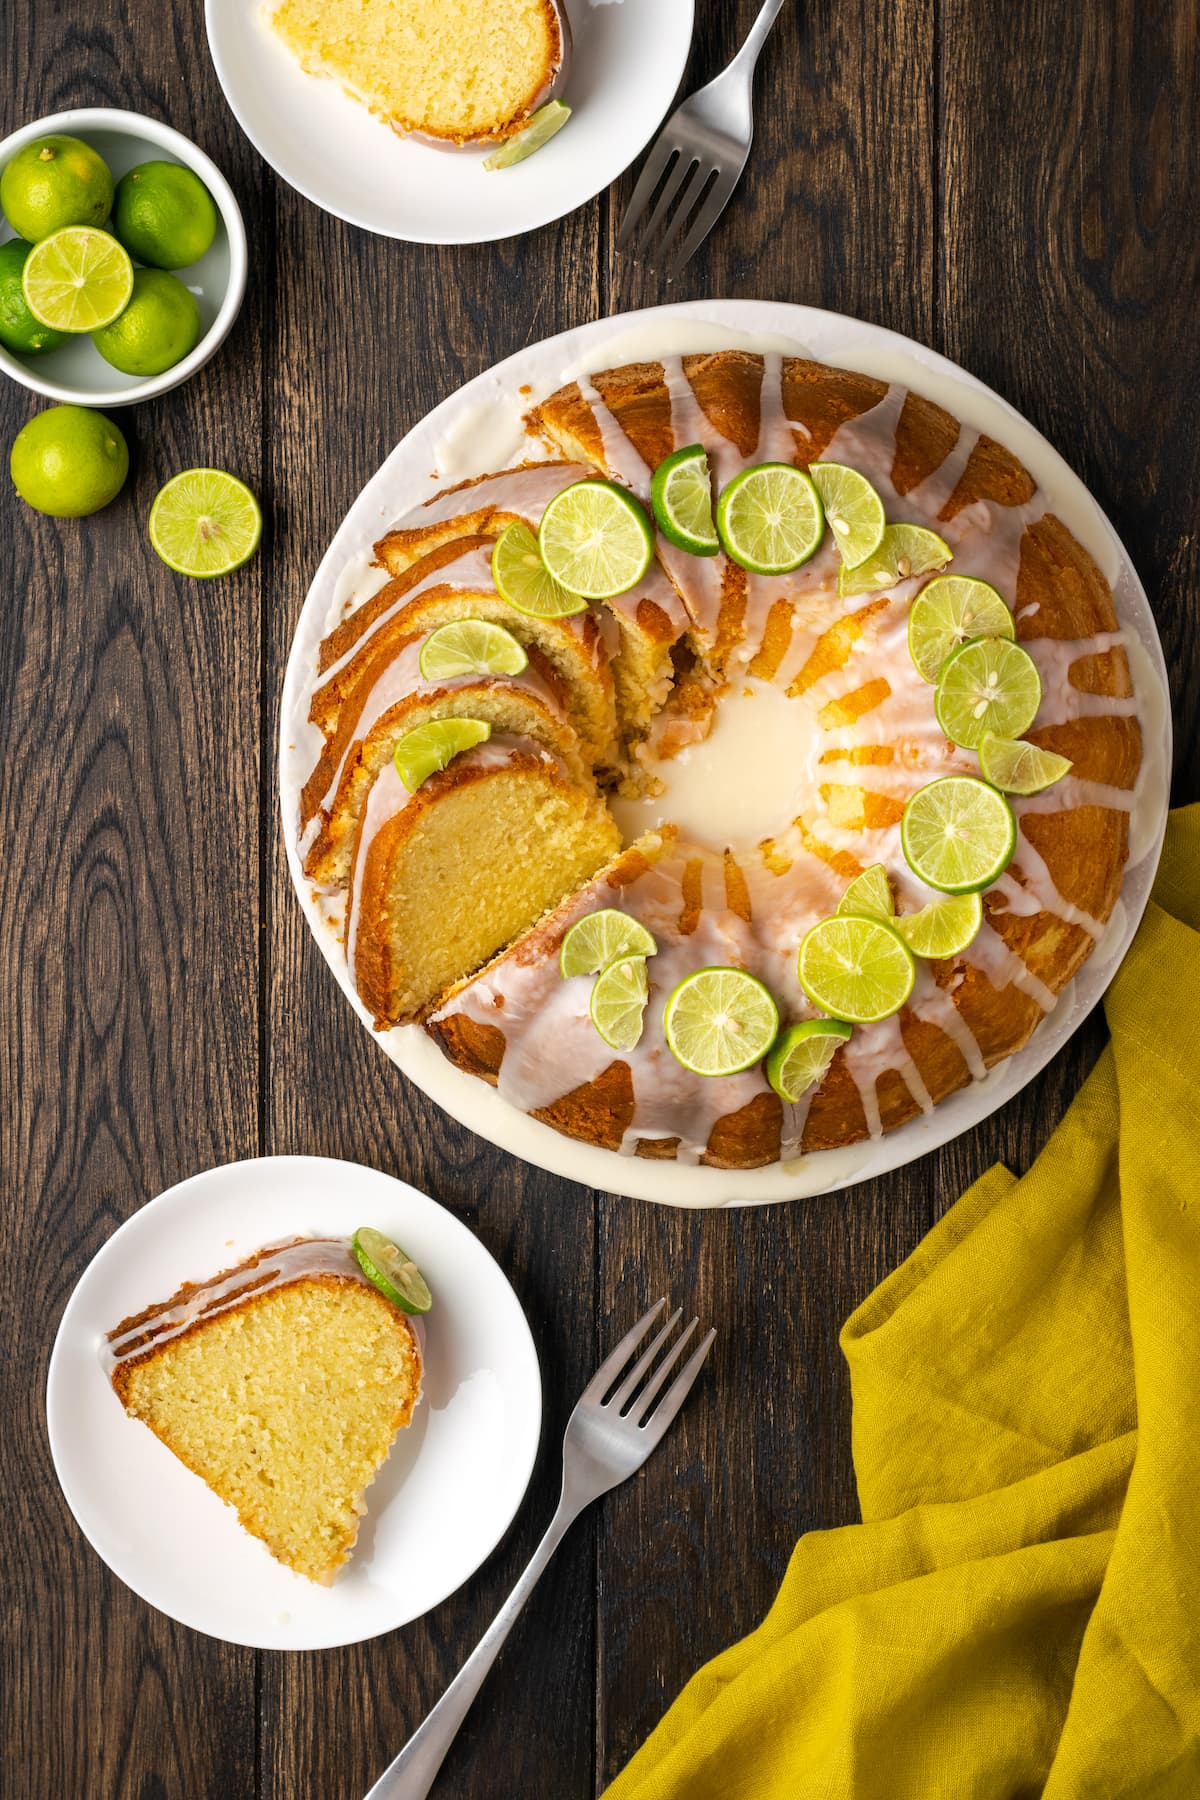 Overhead view of a whole Key lime pound cake cut into slices, next to a slice served on a white plate.